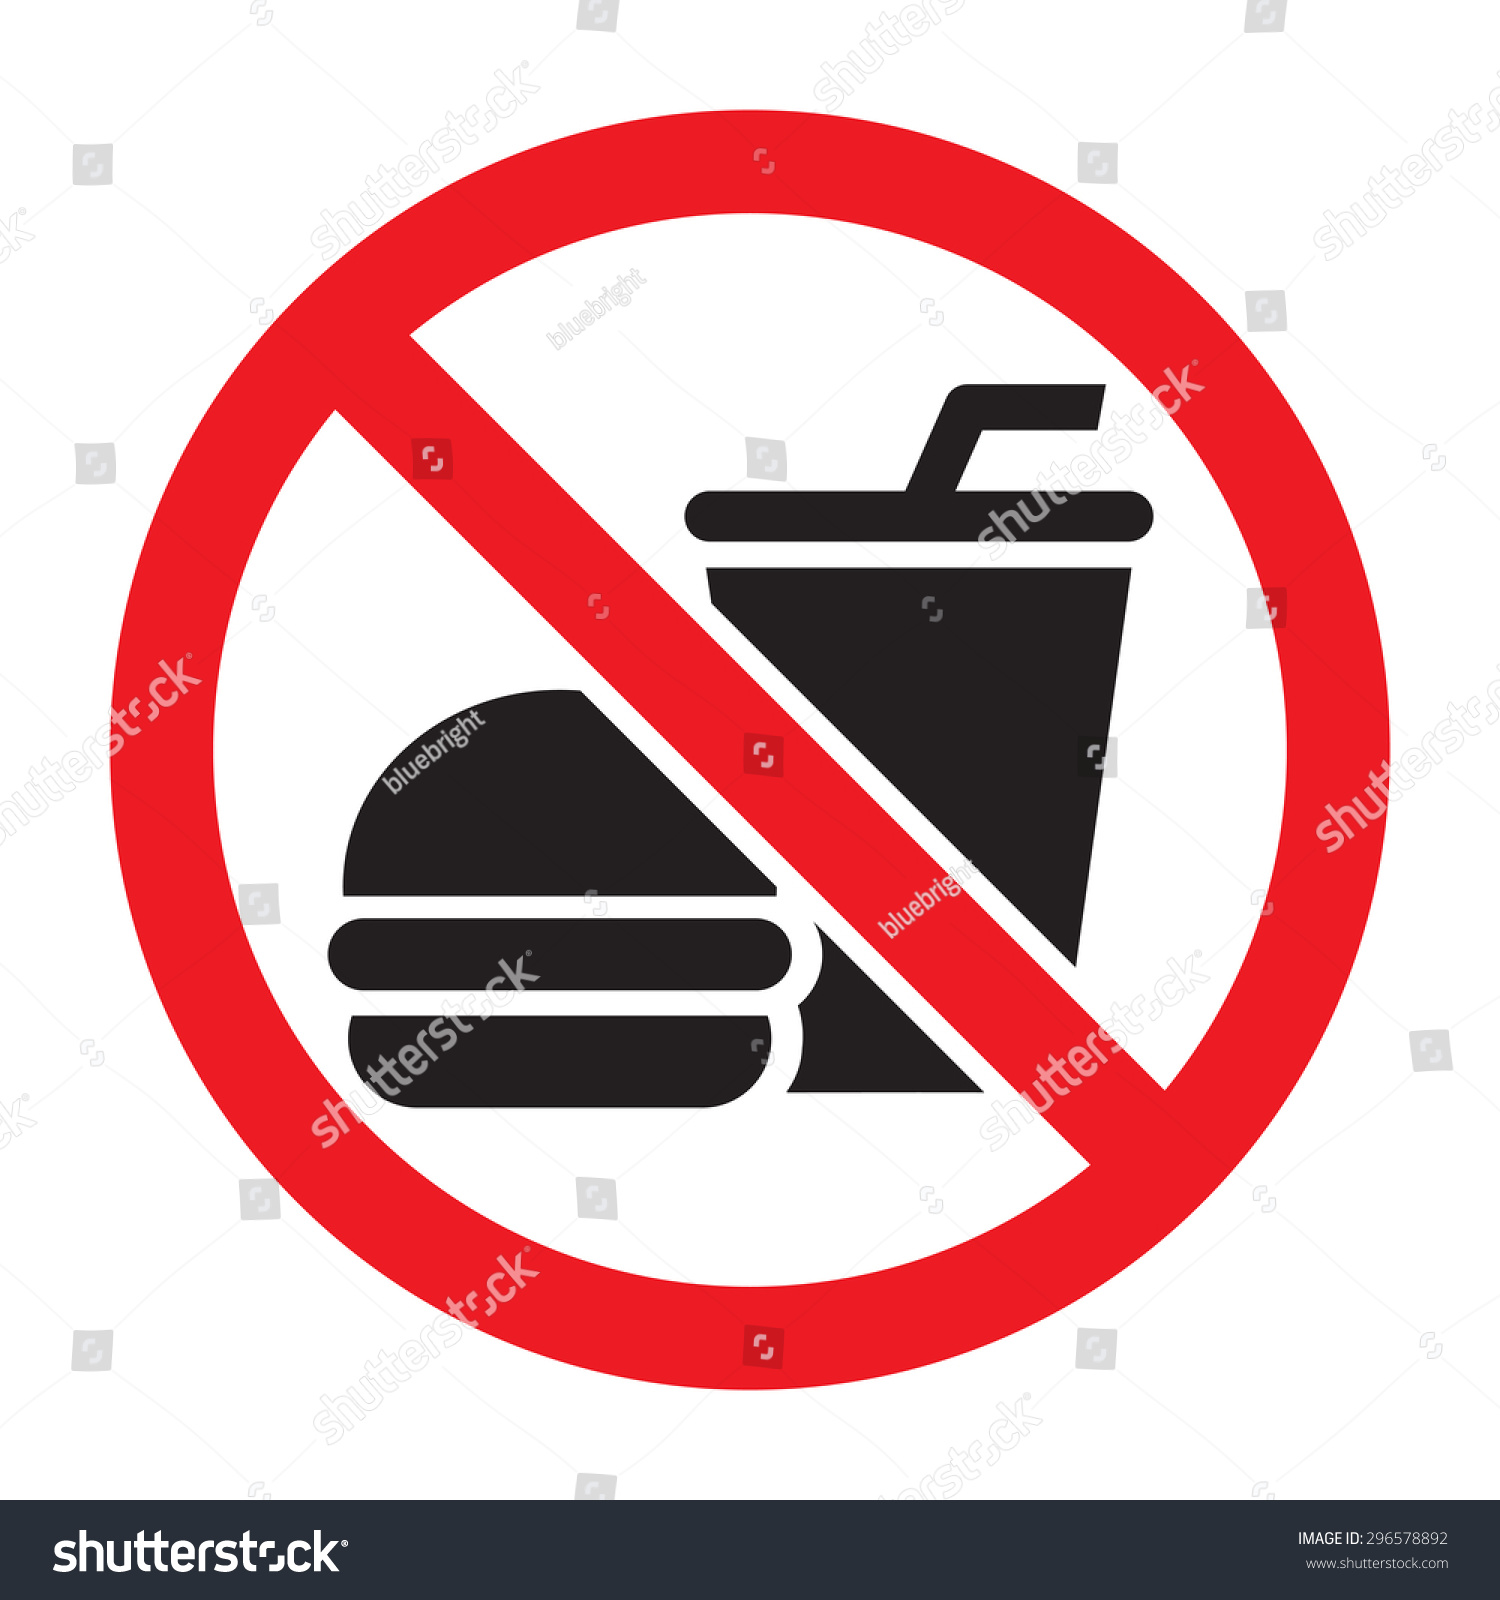 No food allowed symbol, isolated on white background. Prohibition sign. #296578892